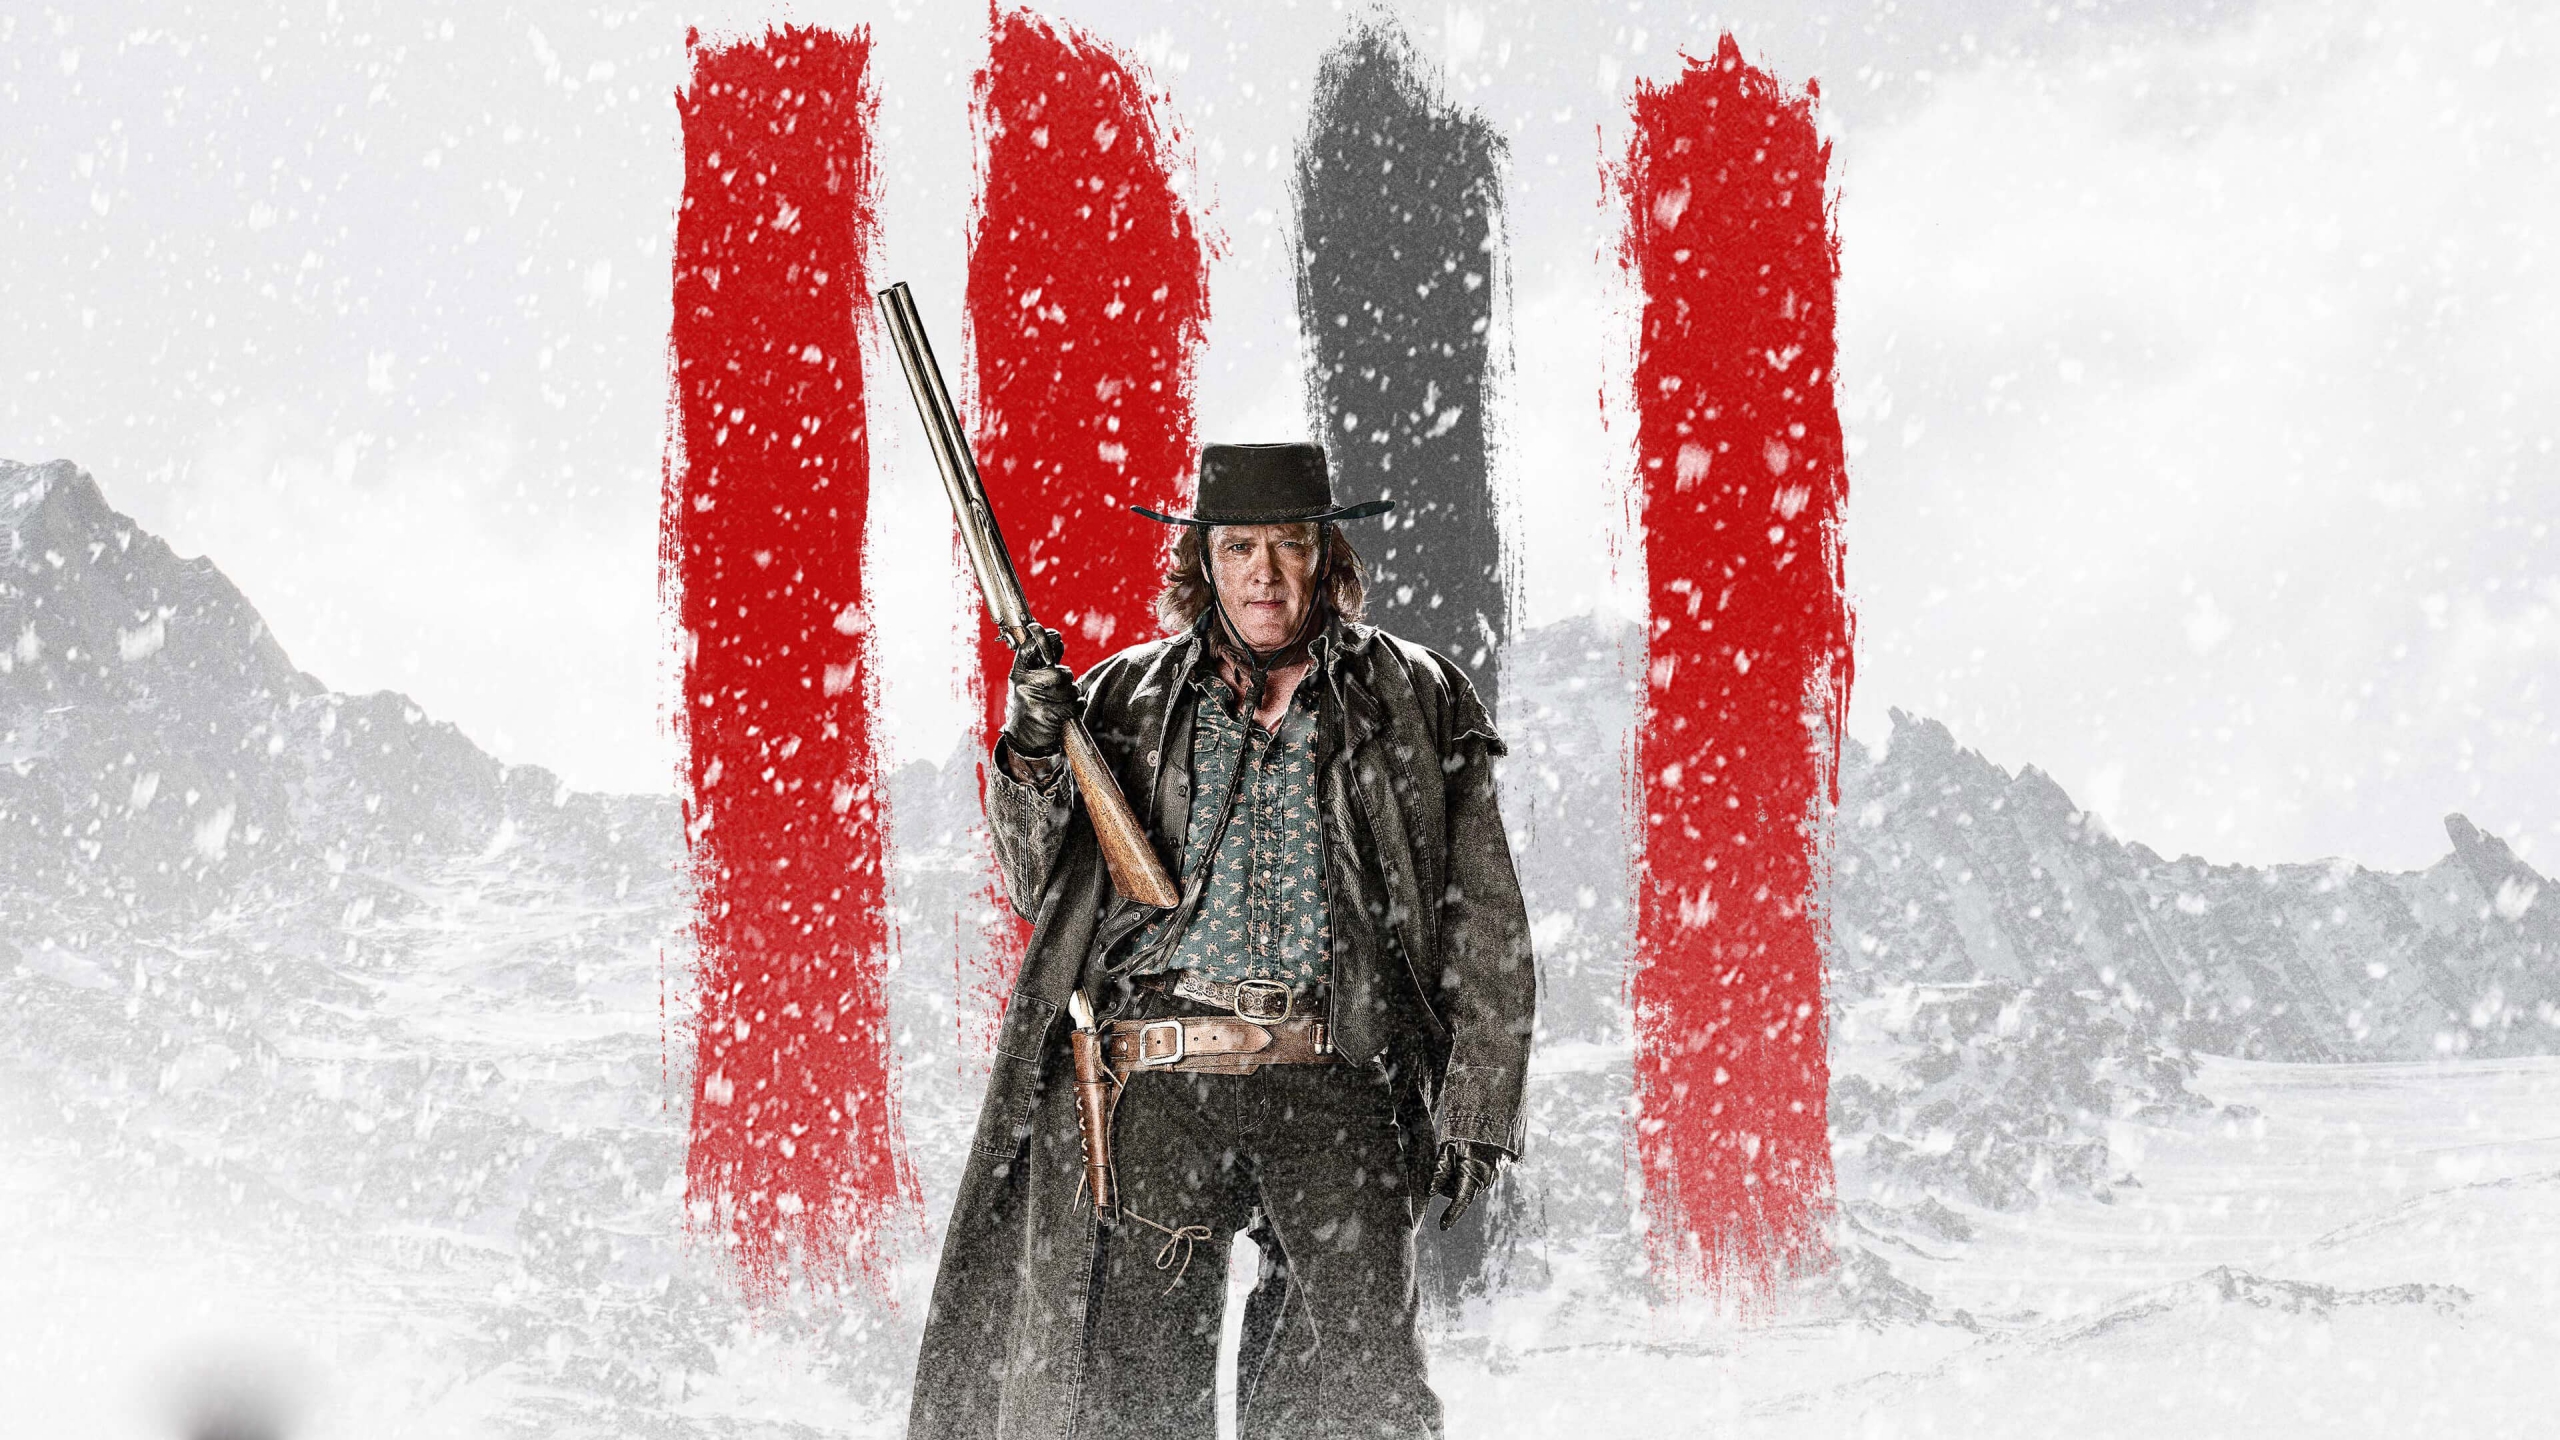 The Hateful Eight Michael Madsen for 2560x1440 HDTV resolution